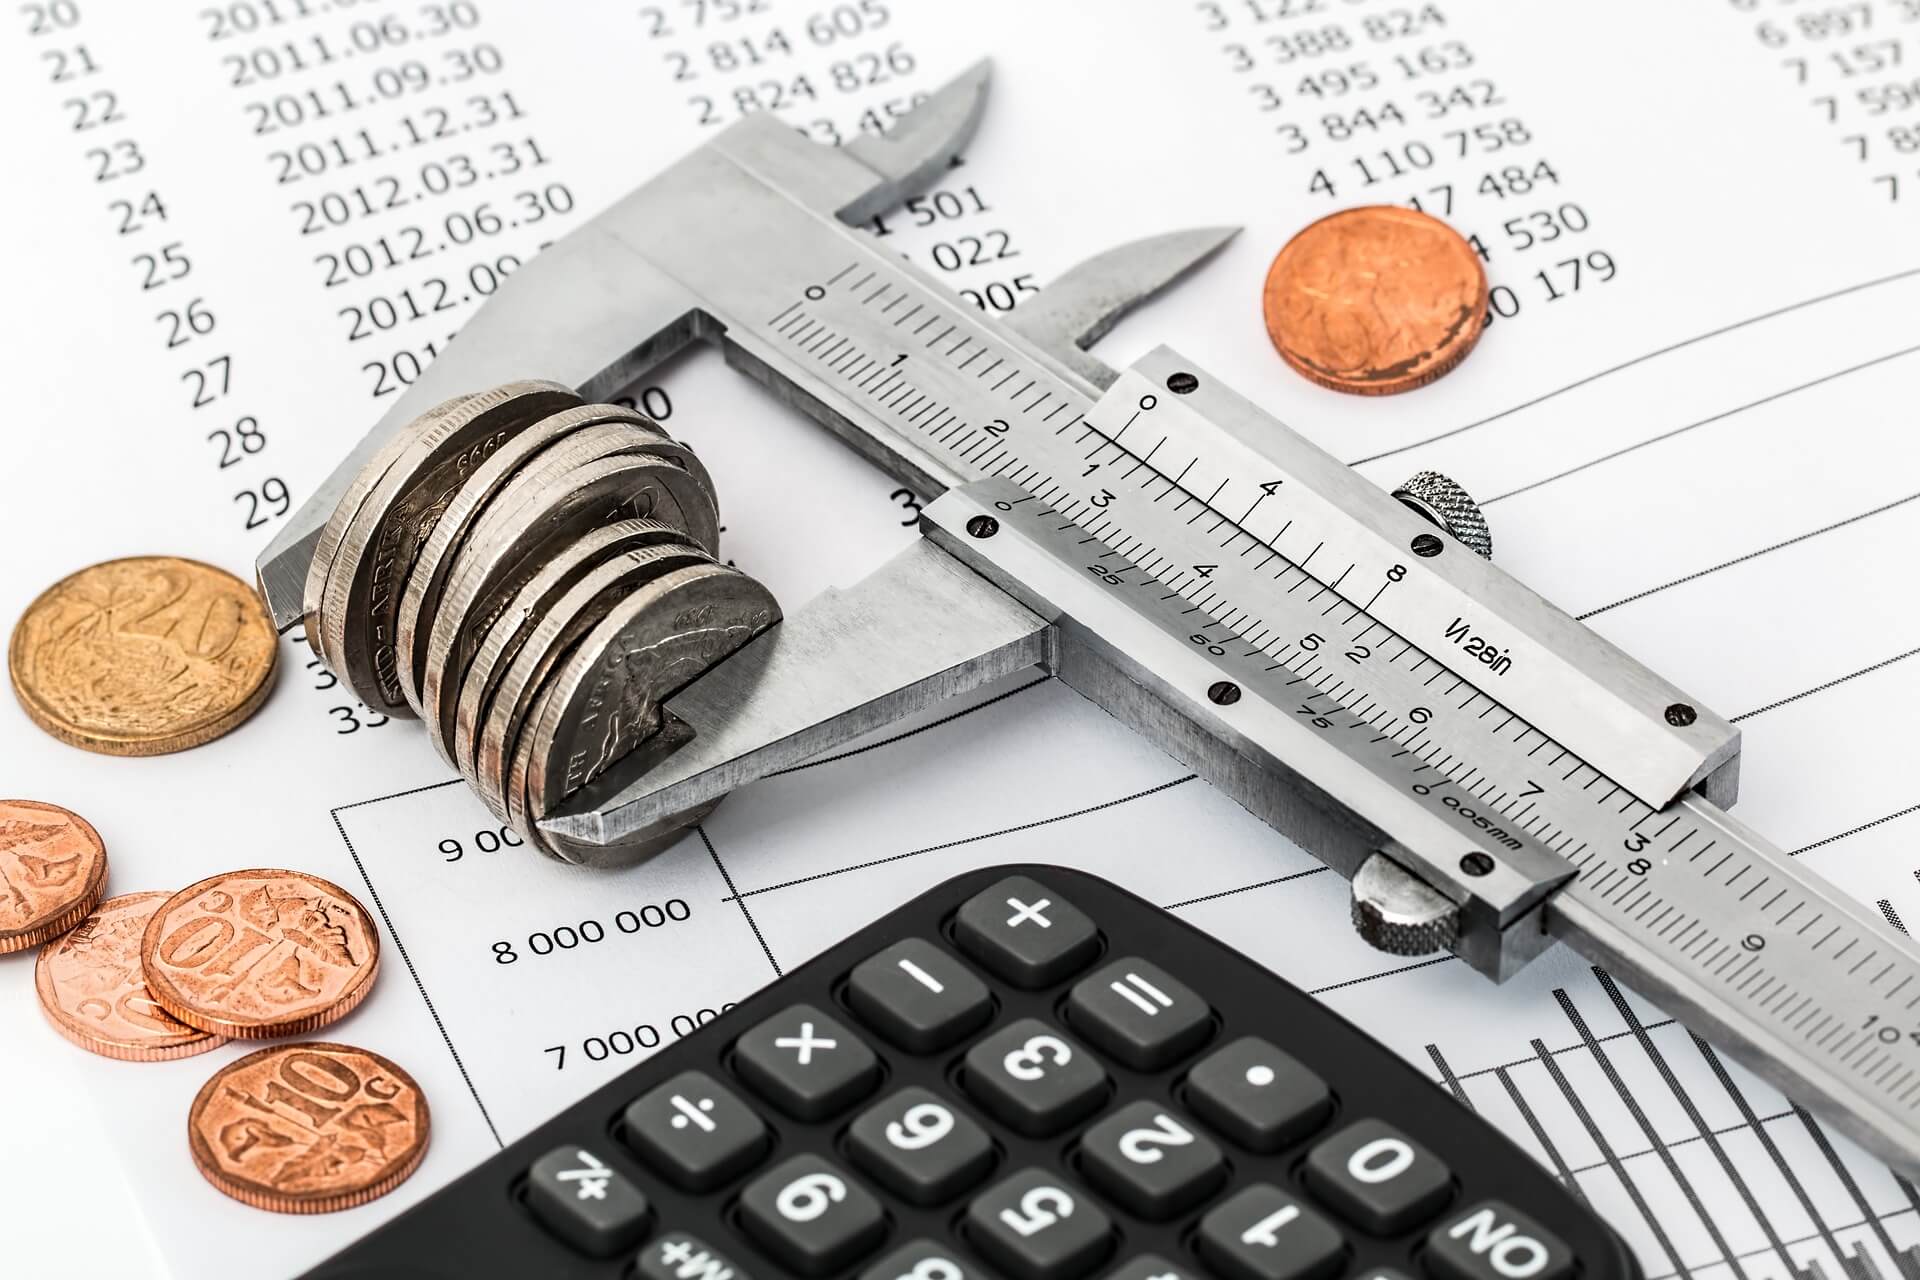 A pair of metal calipers holding a stack of silver coins, lying atop a spreadsheet next to a calculator and some copper coins.